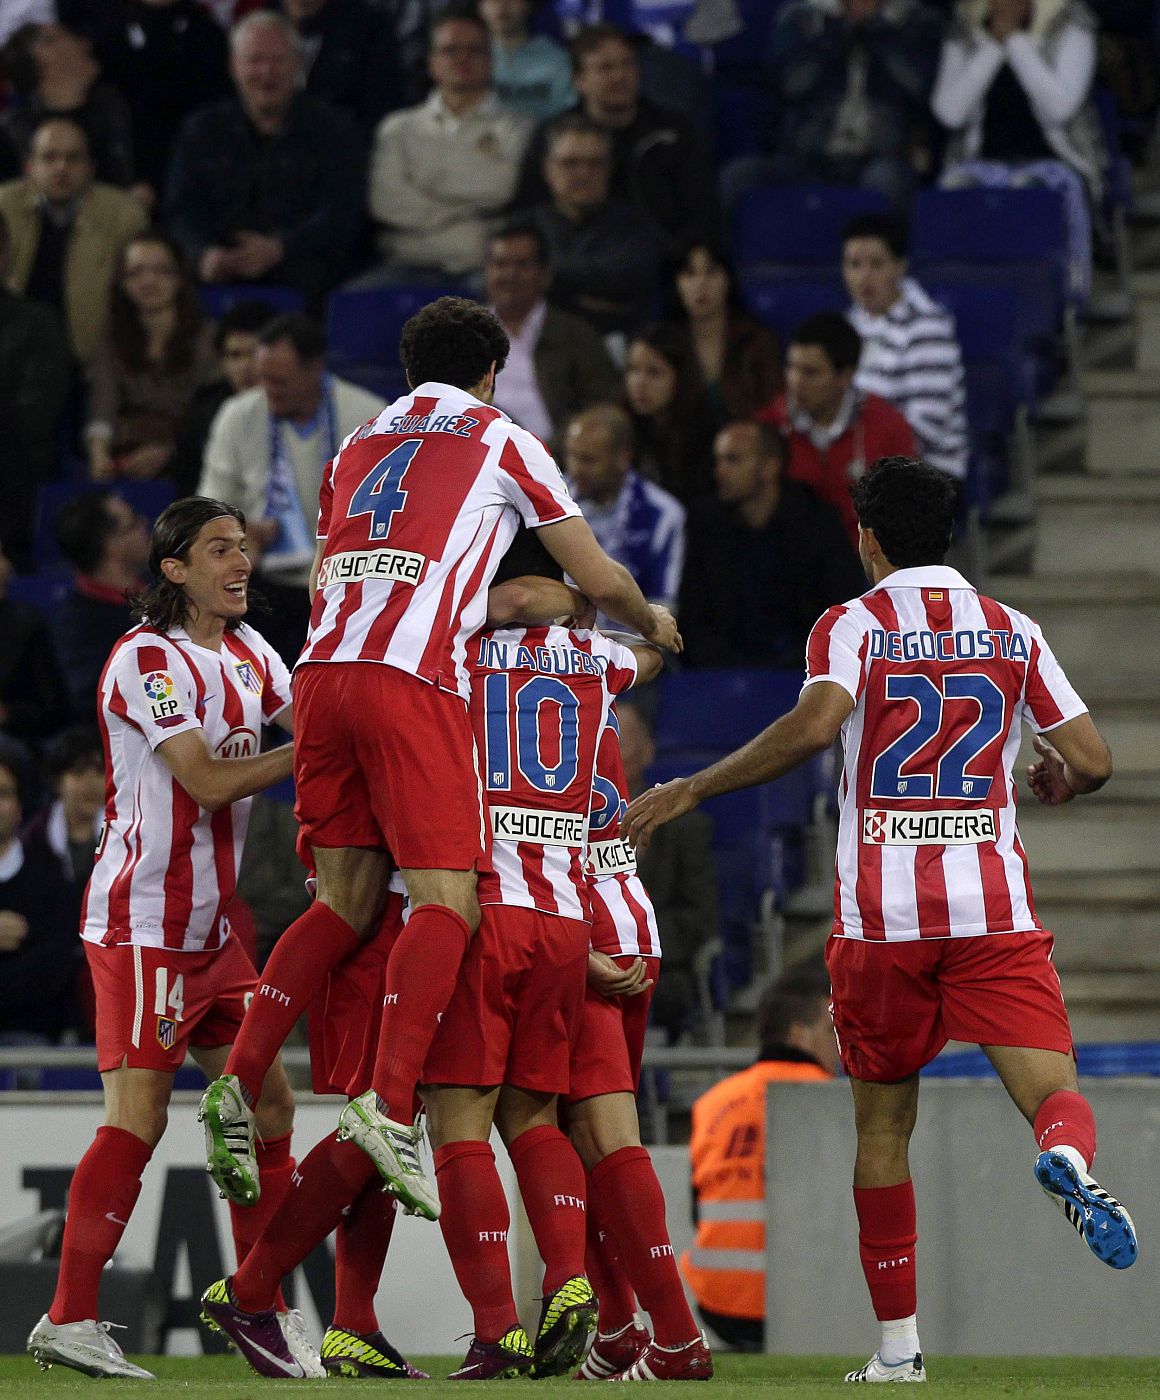 Atletico Madrid's players celebrate a goal against Espanyol during their Spanish first division soccer match at Cornella-El Prat stadium, near Barcelona